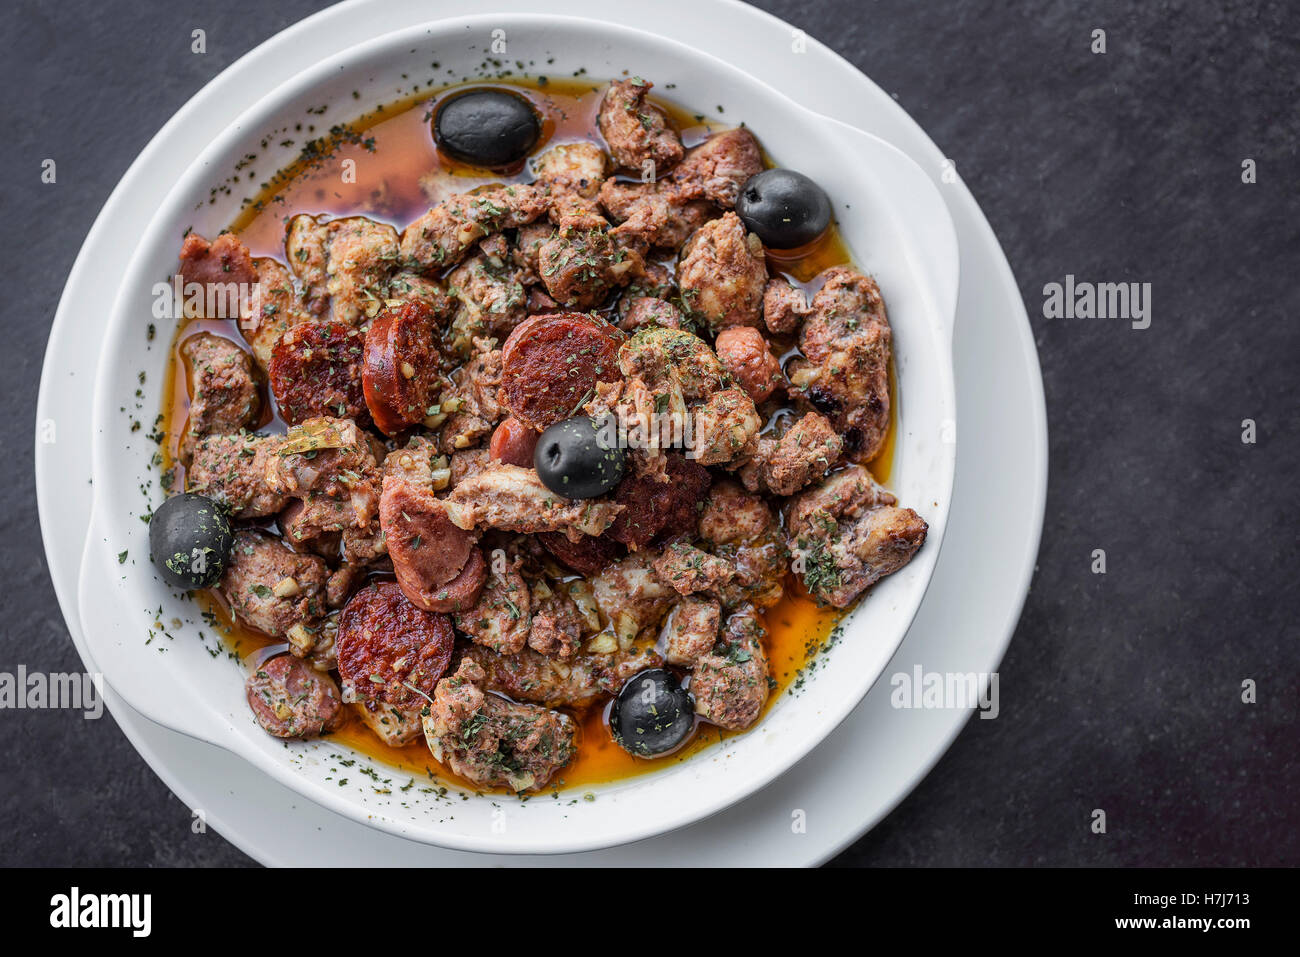 pica pau traditional portuguese spicy sauce pork and sausage tapas snack Stock Photo